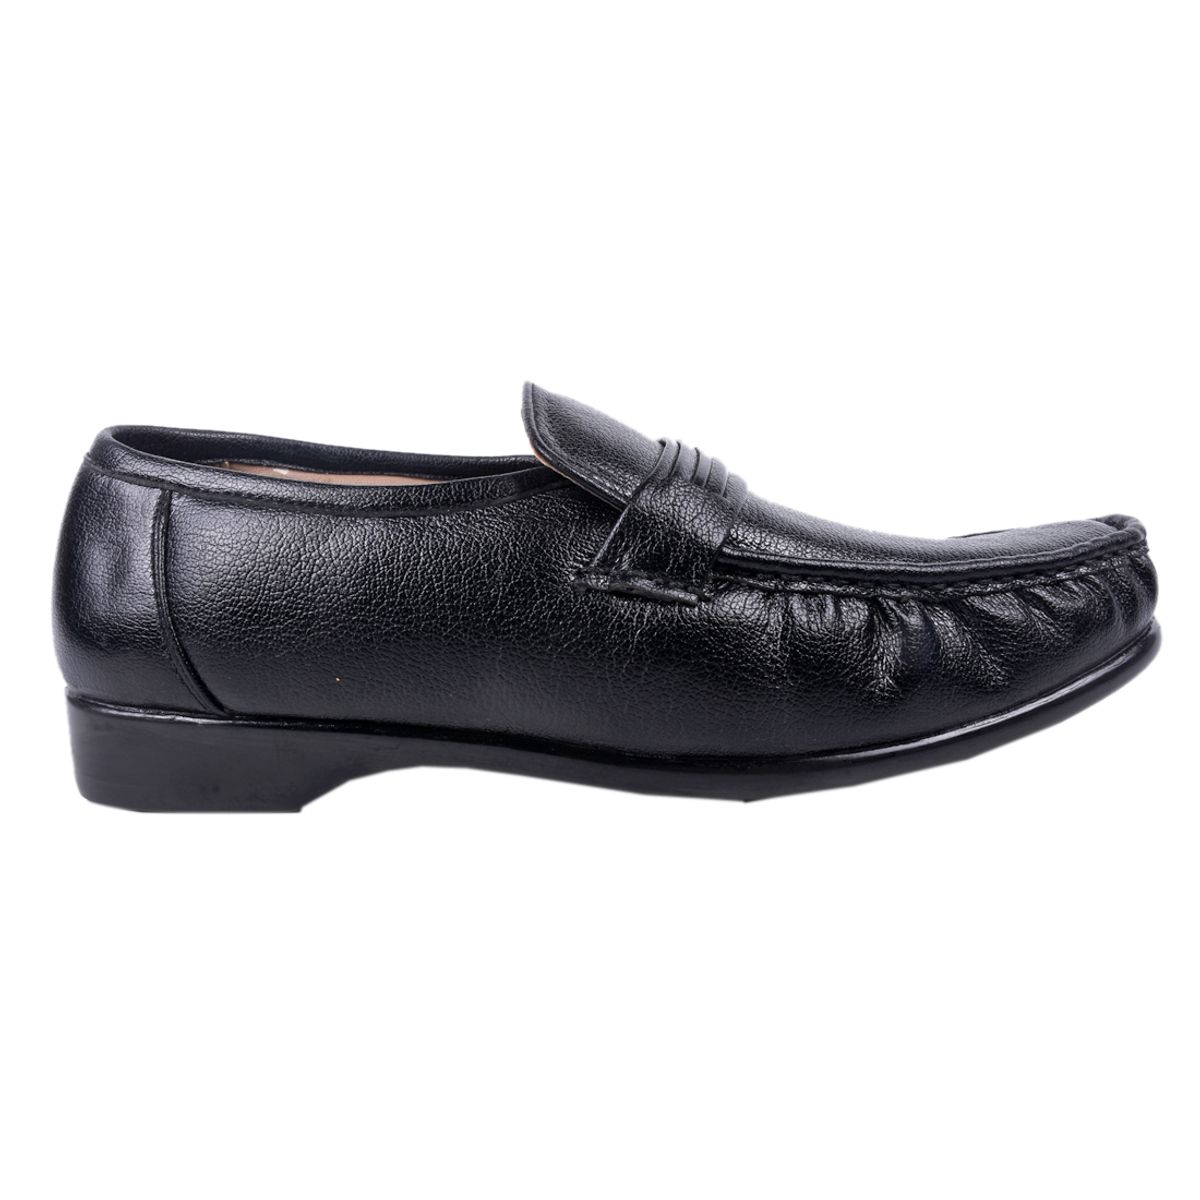 Buy ZODI Old School Loafers at Lowest Price - ZOOLSC8052DSM212481 | Kraftly